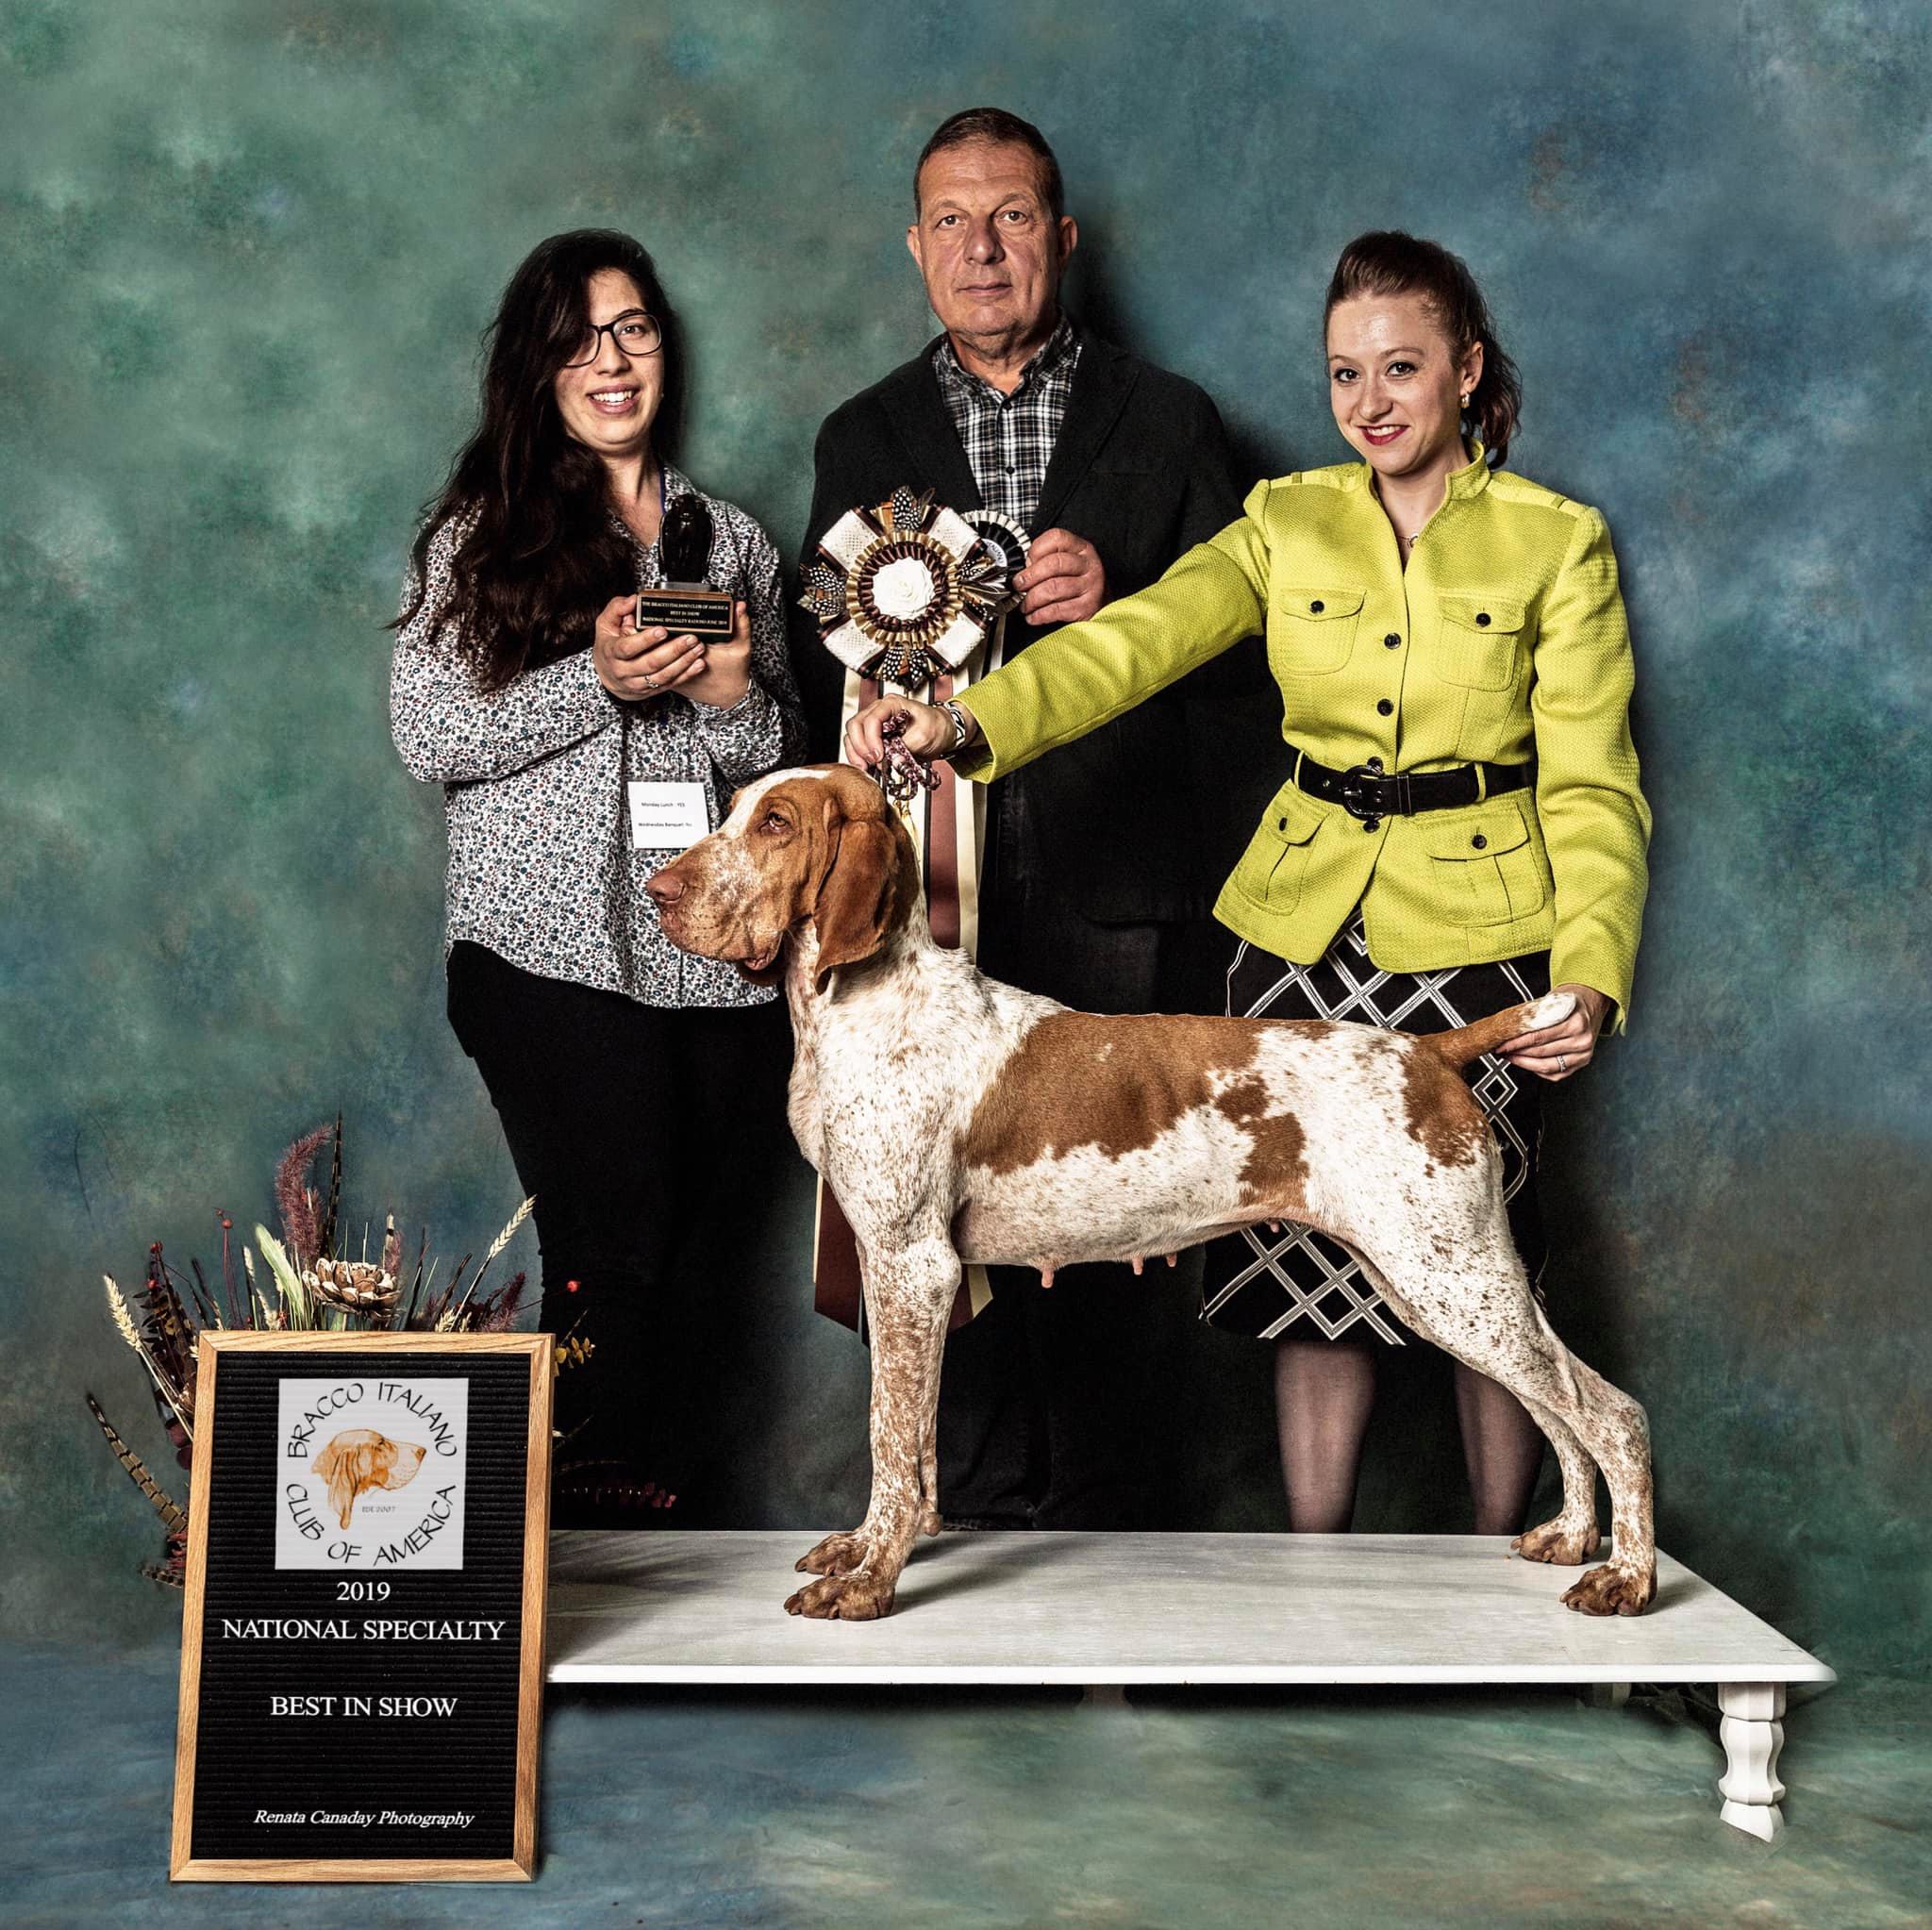 2019 National Specialty Best in Show